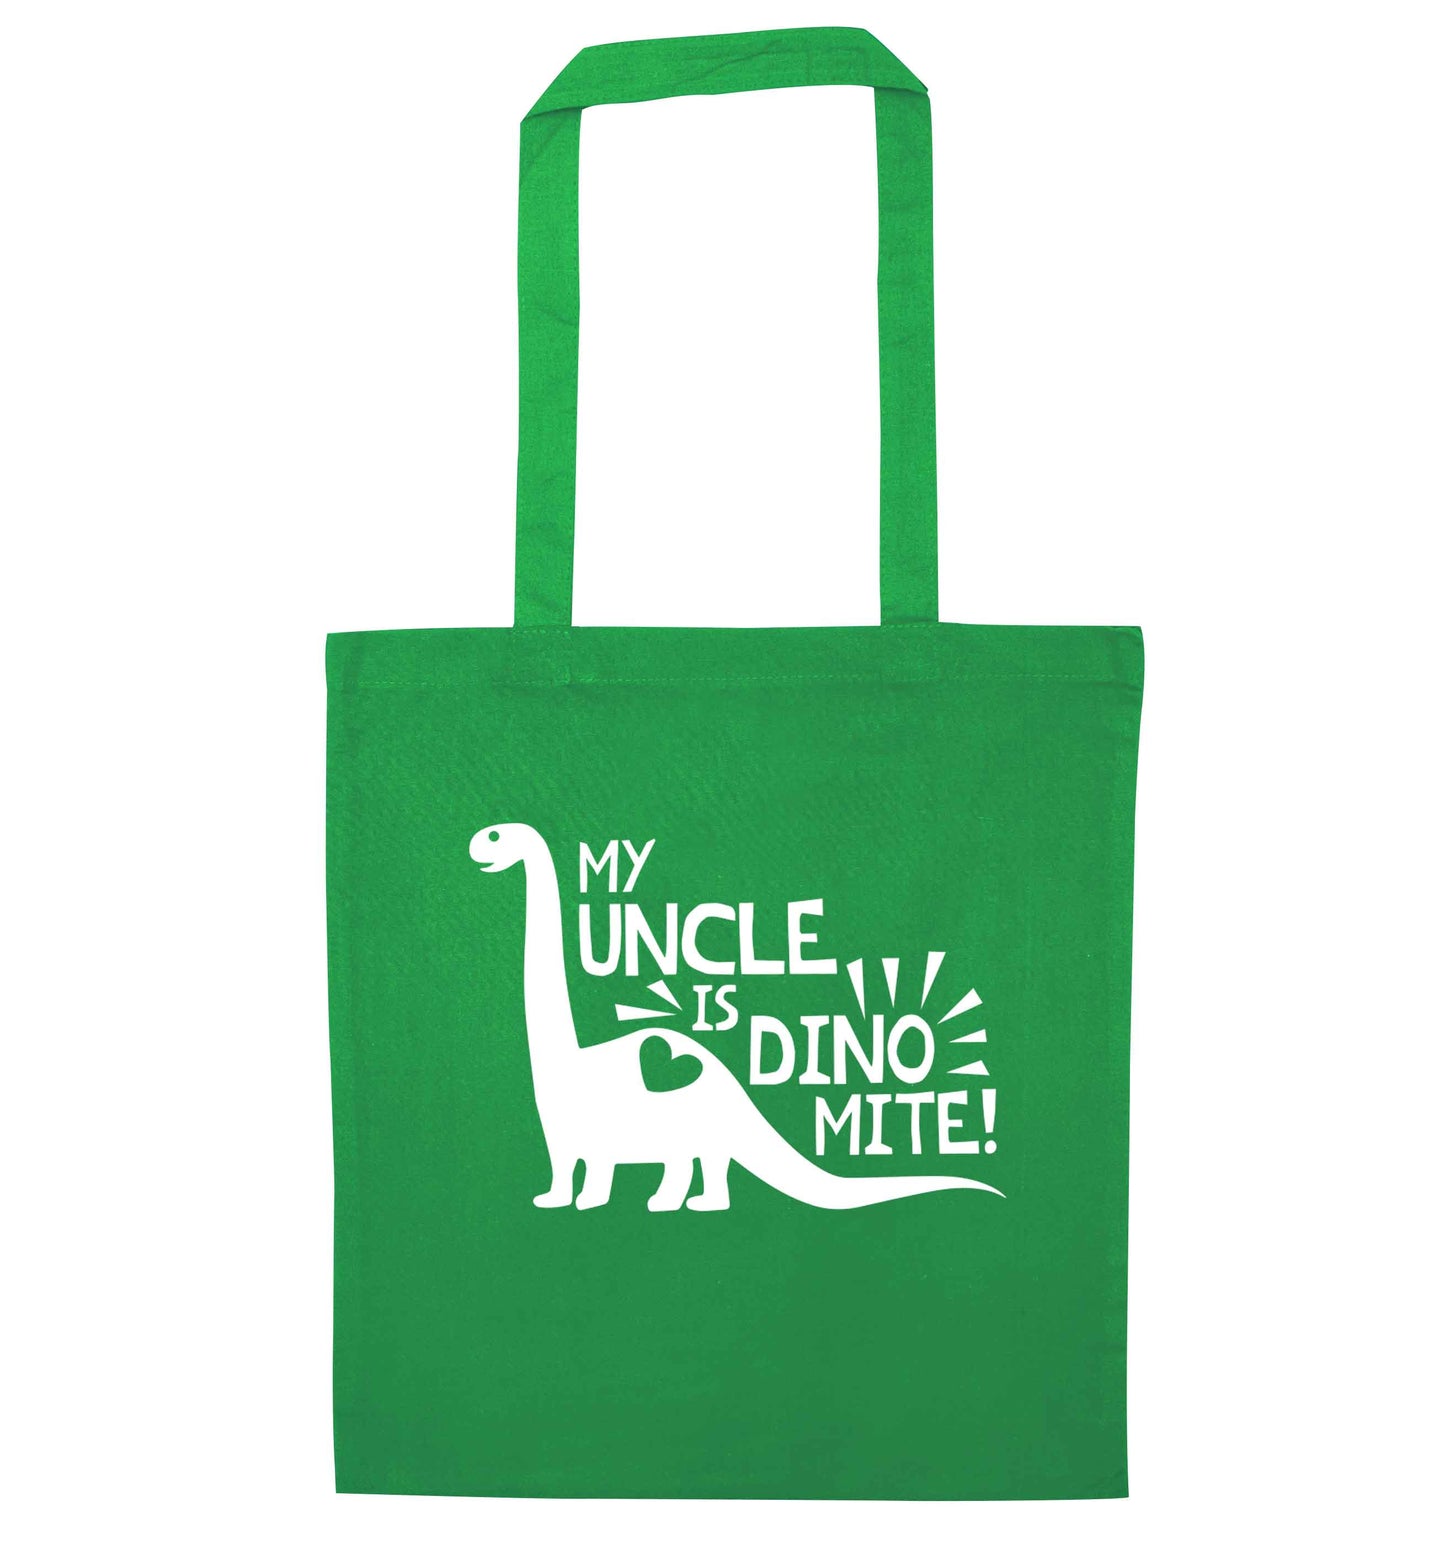 My uncle is dinomite! green tote bag